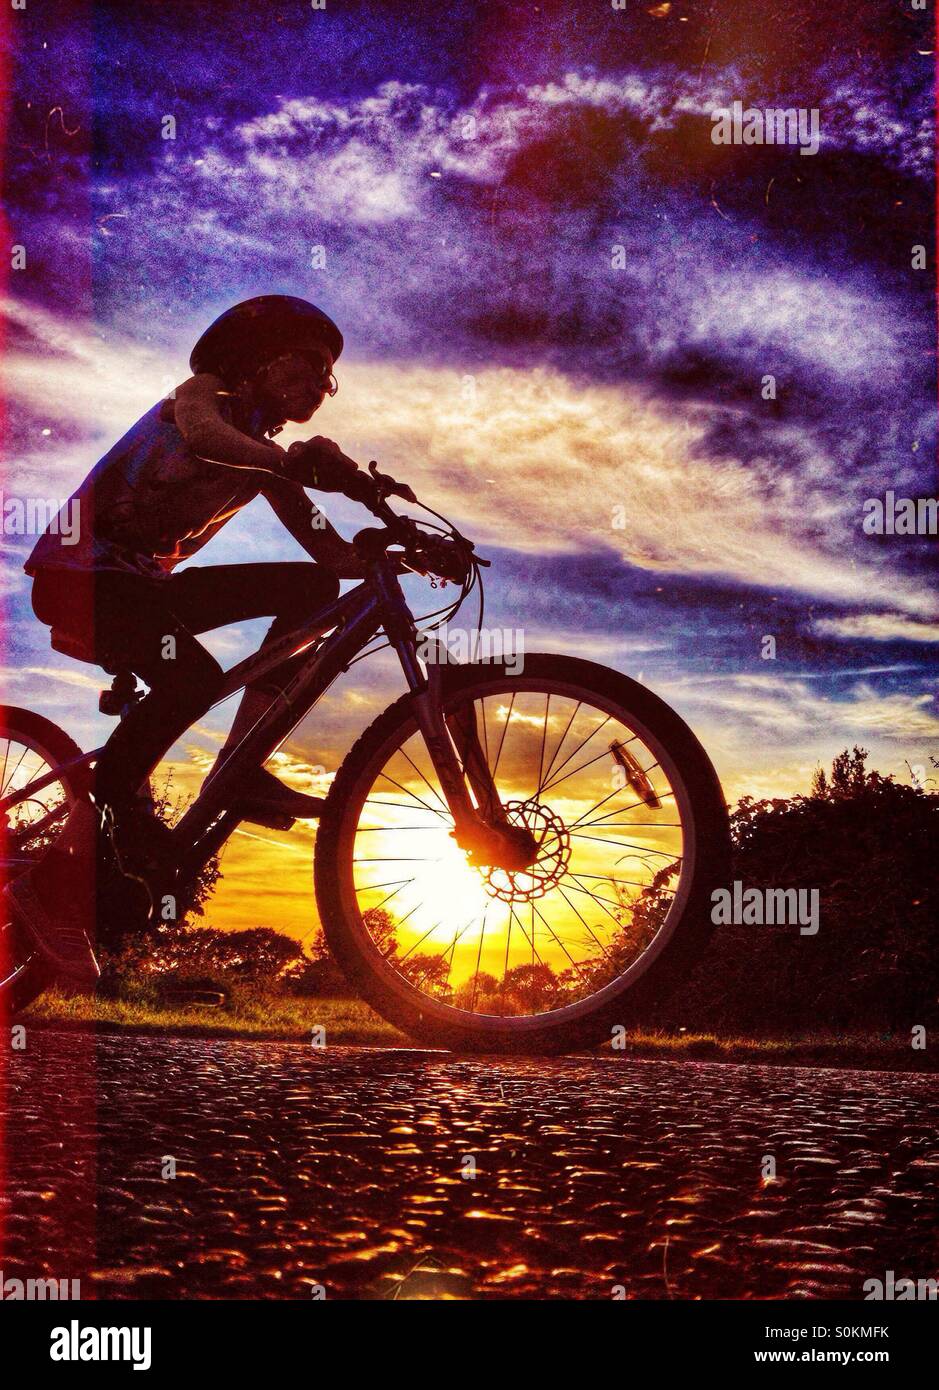 Young girl riding bike silhouetted against setting sun Stock Photo